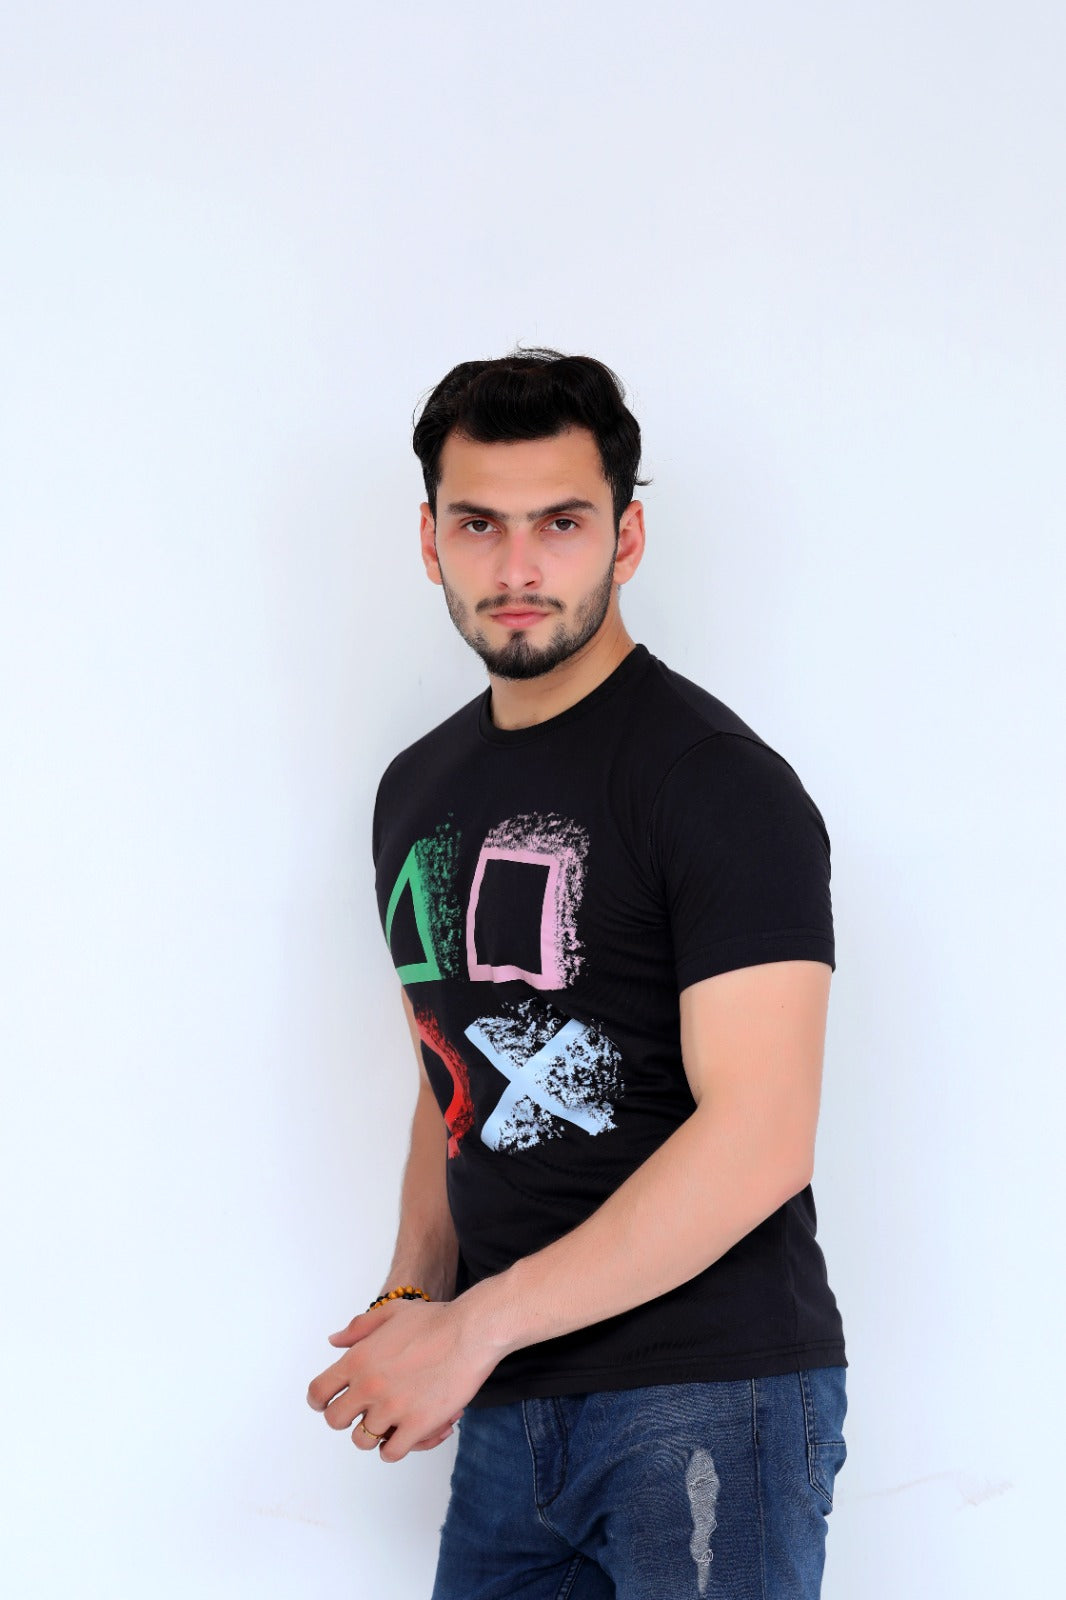 PlayStation Printed Tee For Him.MTST-0169Blk